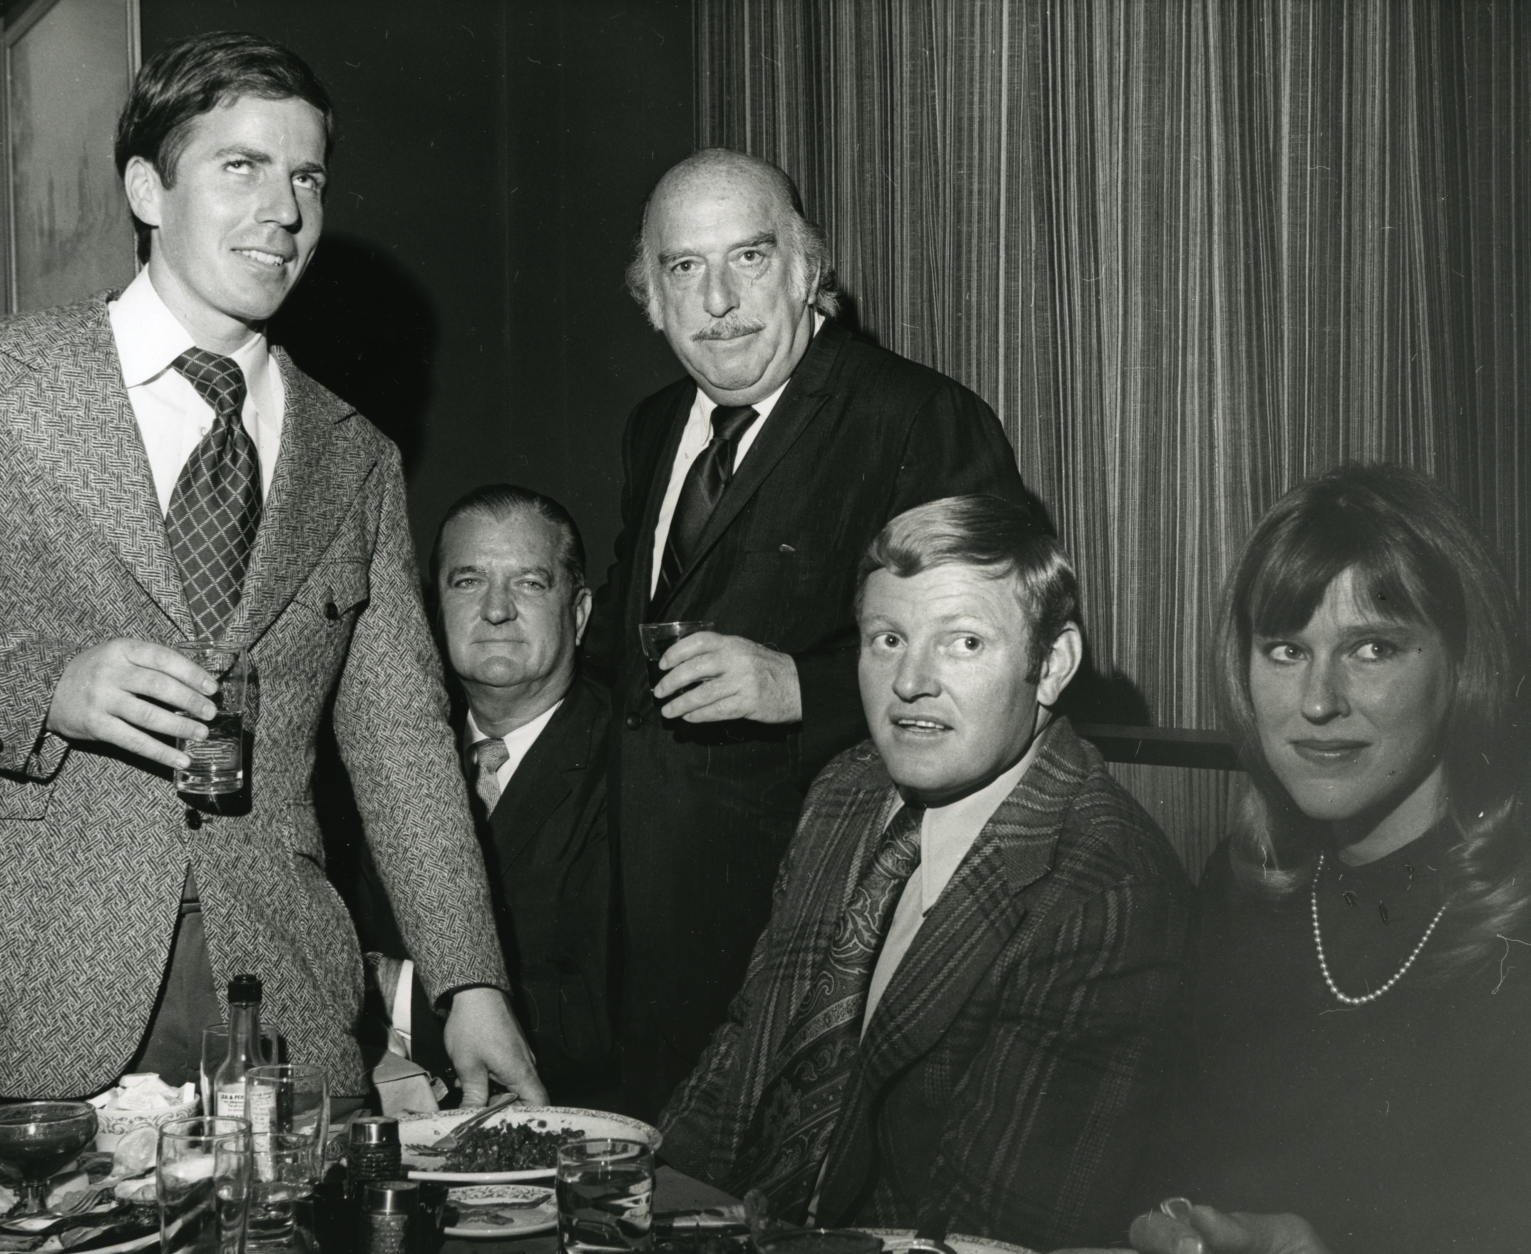 Another Burgundy-and-Gold legend dined at Duke's back in the day: Sonny Jurgensen. (Courtesy Historical Society of Washington, D.C.)